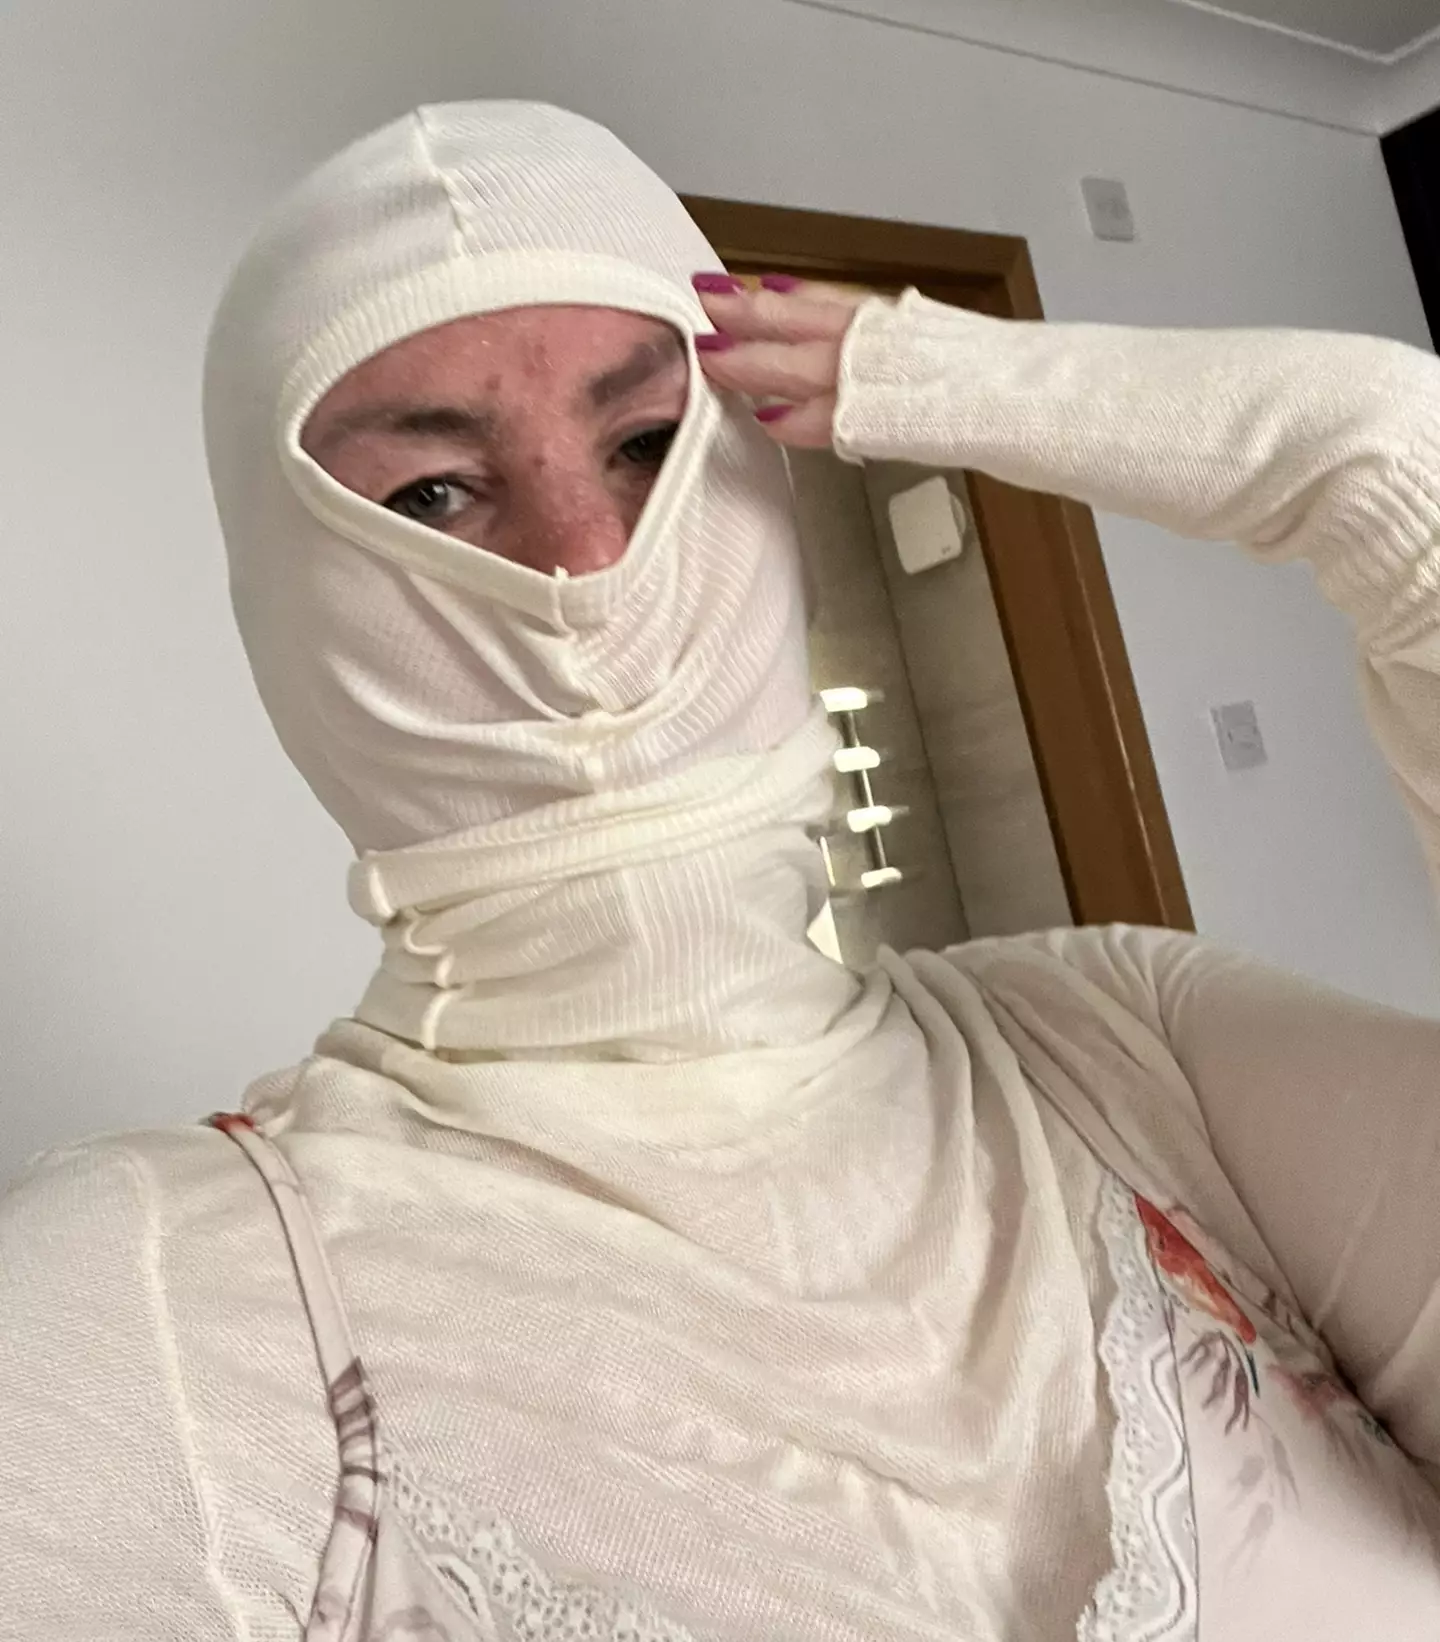 Flett would resort to wearing a balaclava and full upper-body bandages to ease the itching.